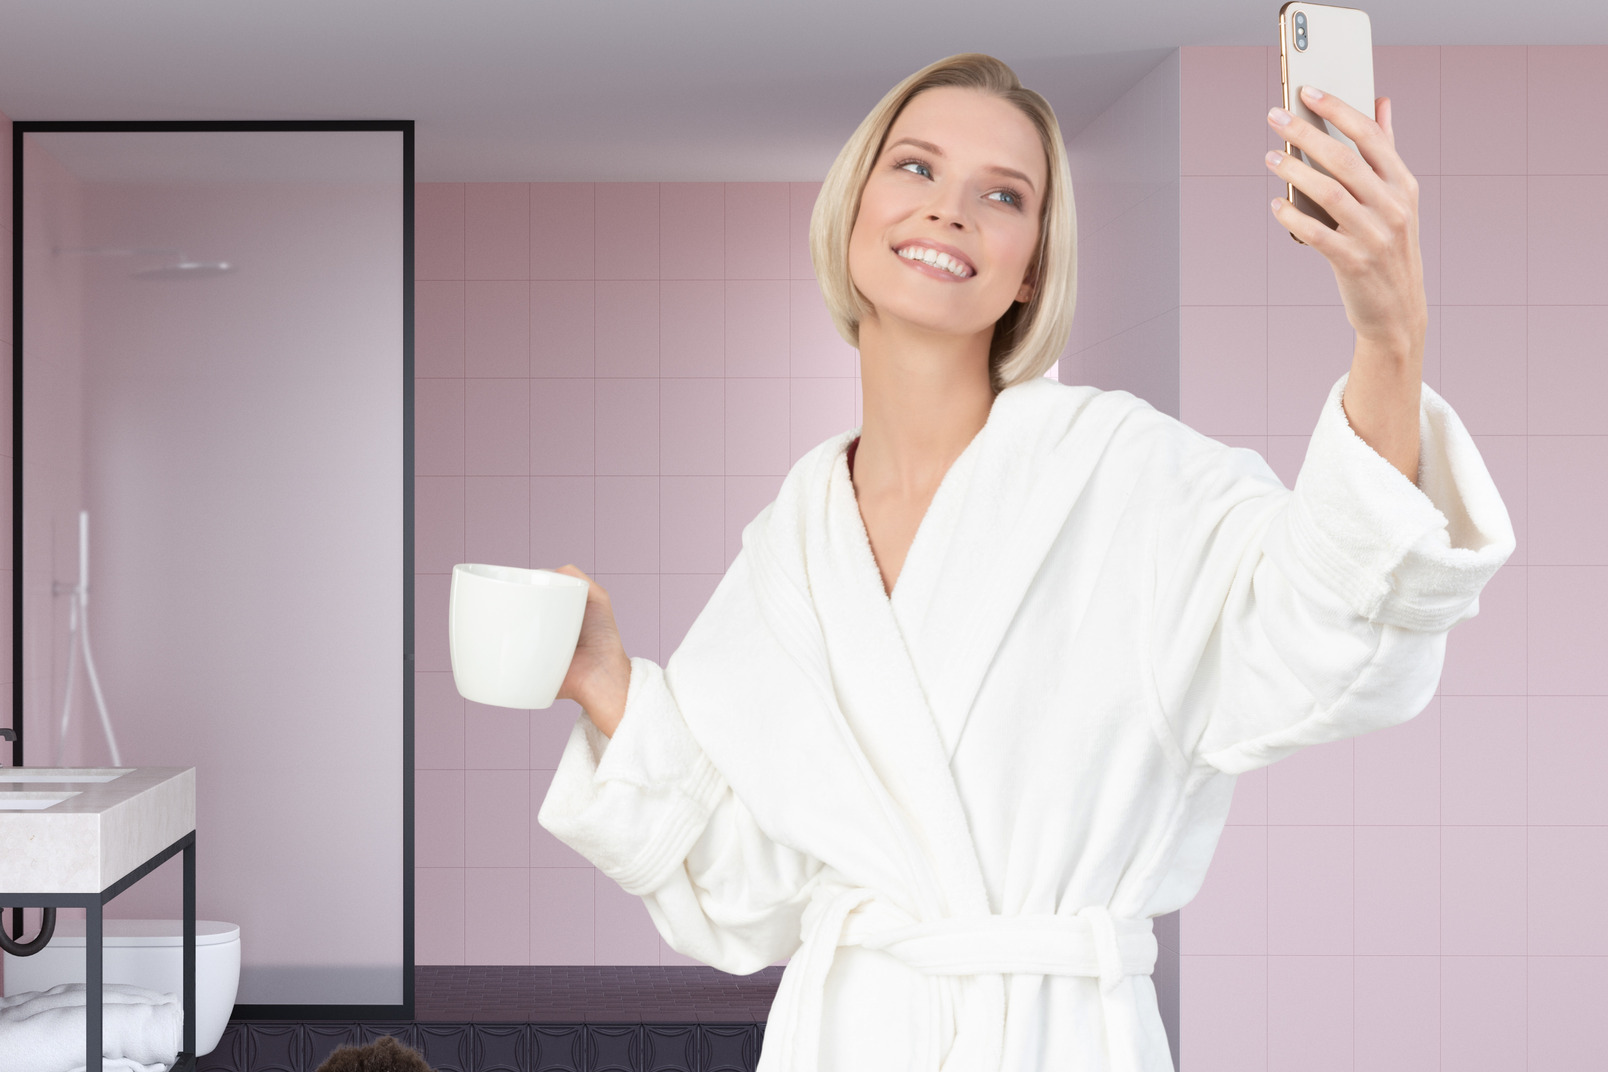 Smiling woman using a smart phone in the bathroom